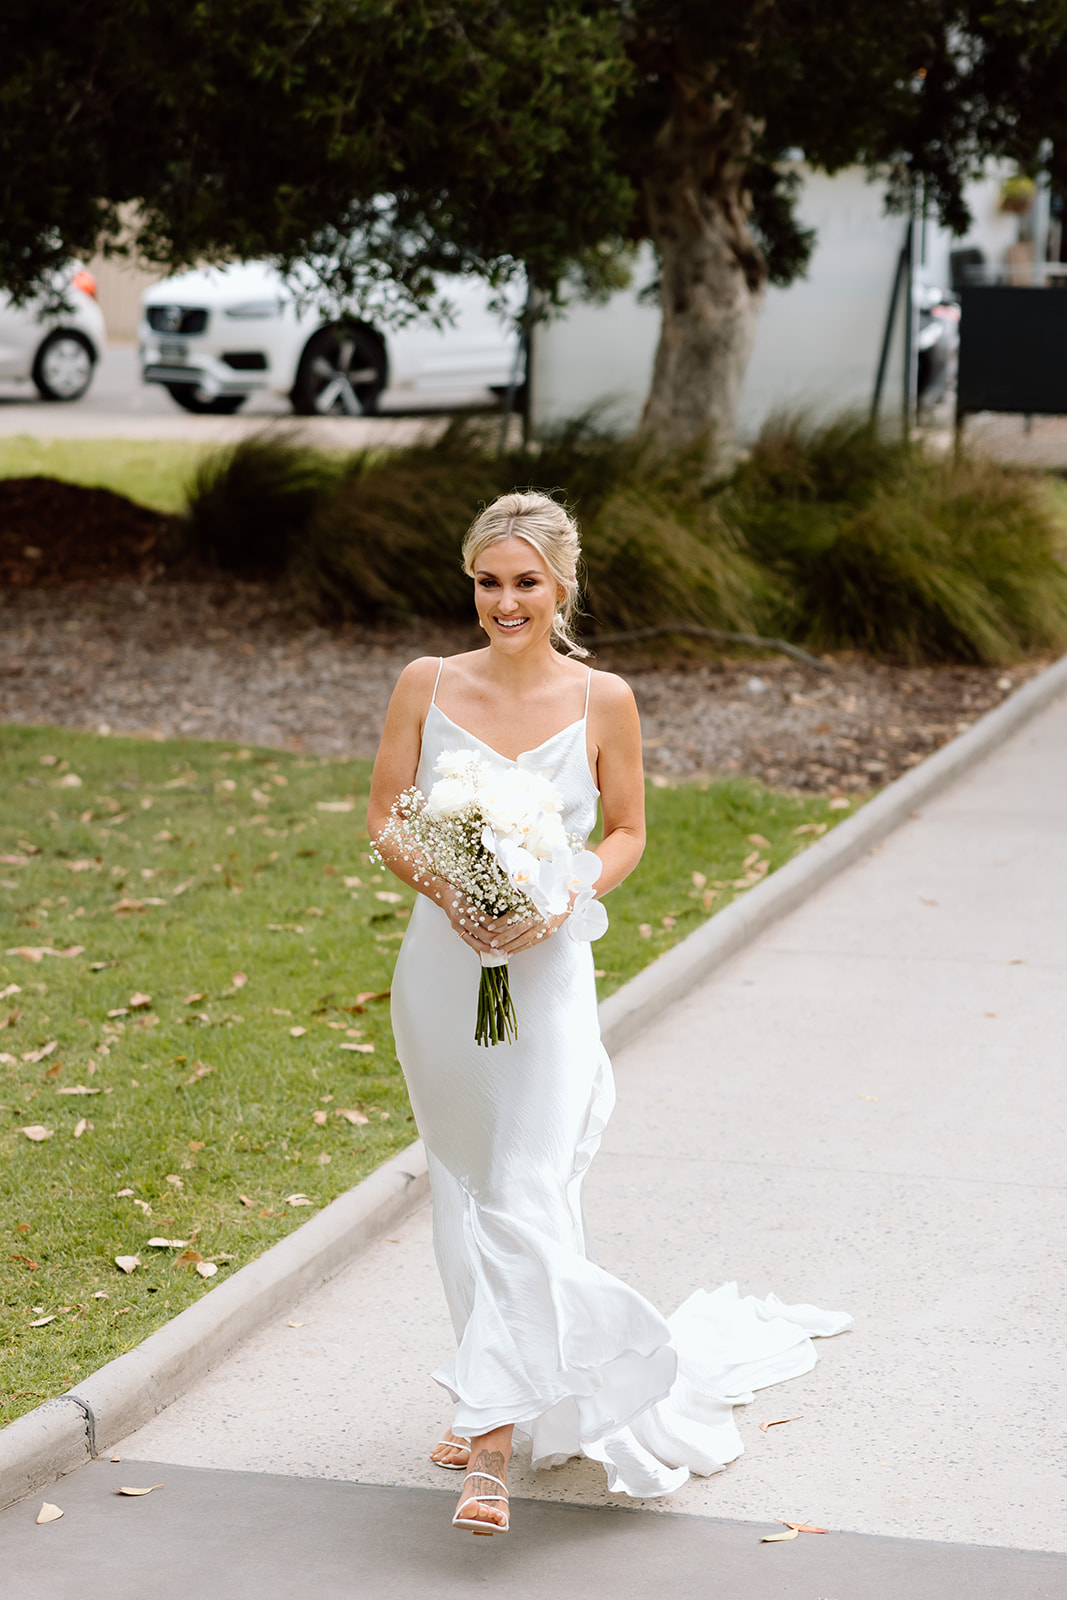 Bride walking down the aisle at the wedding in The Fernery Mosman